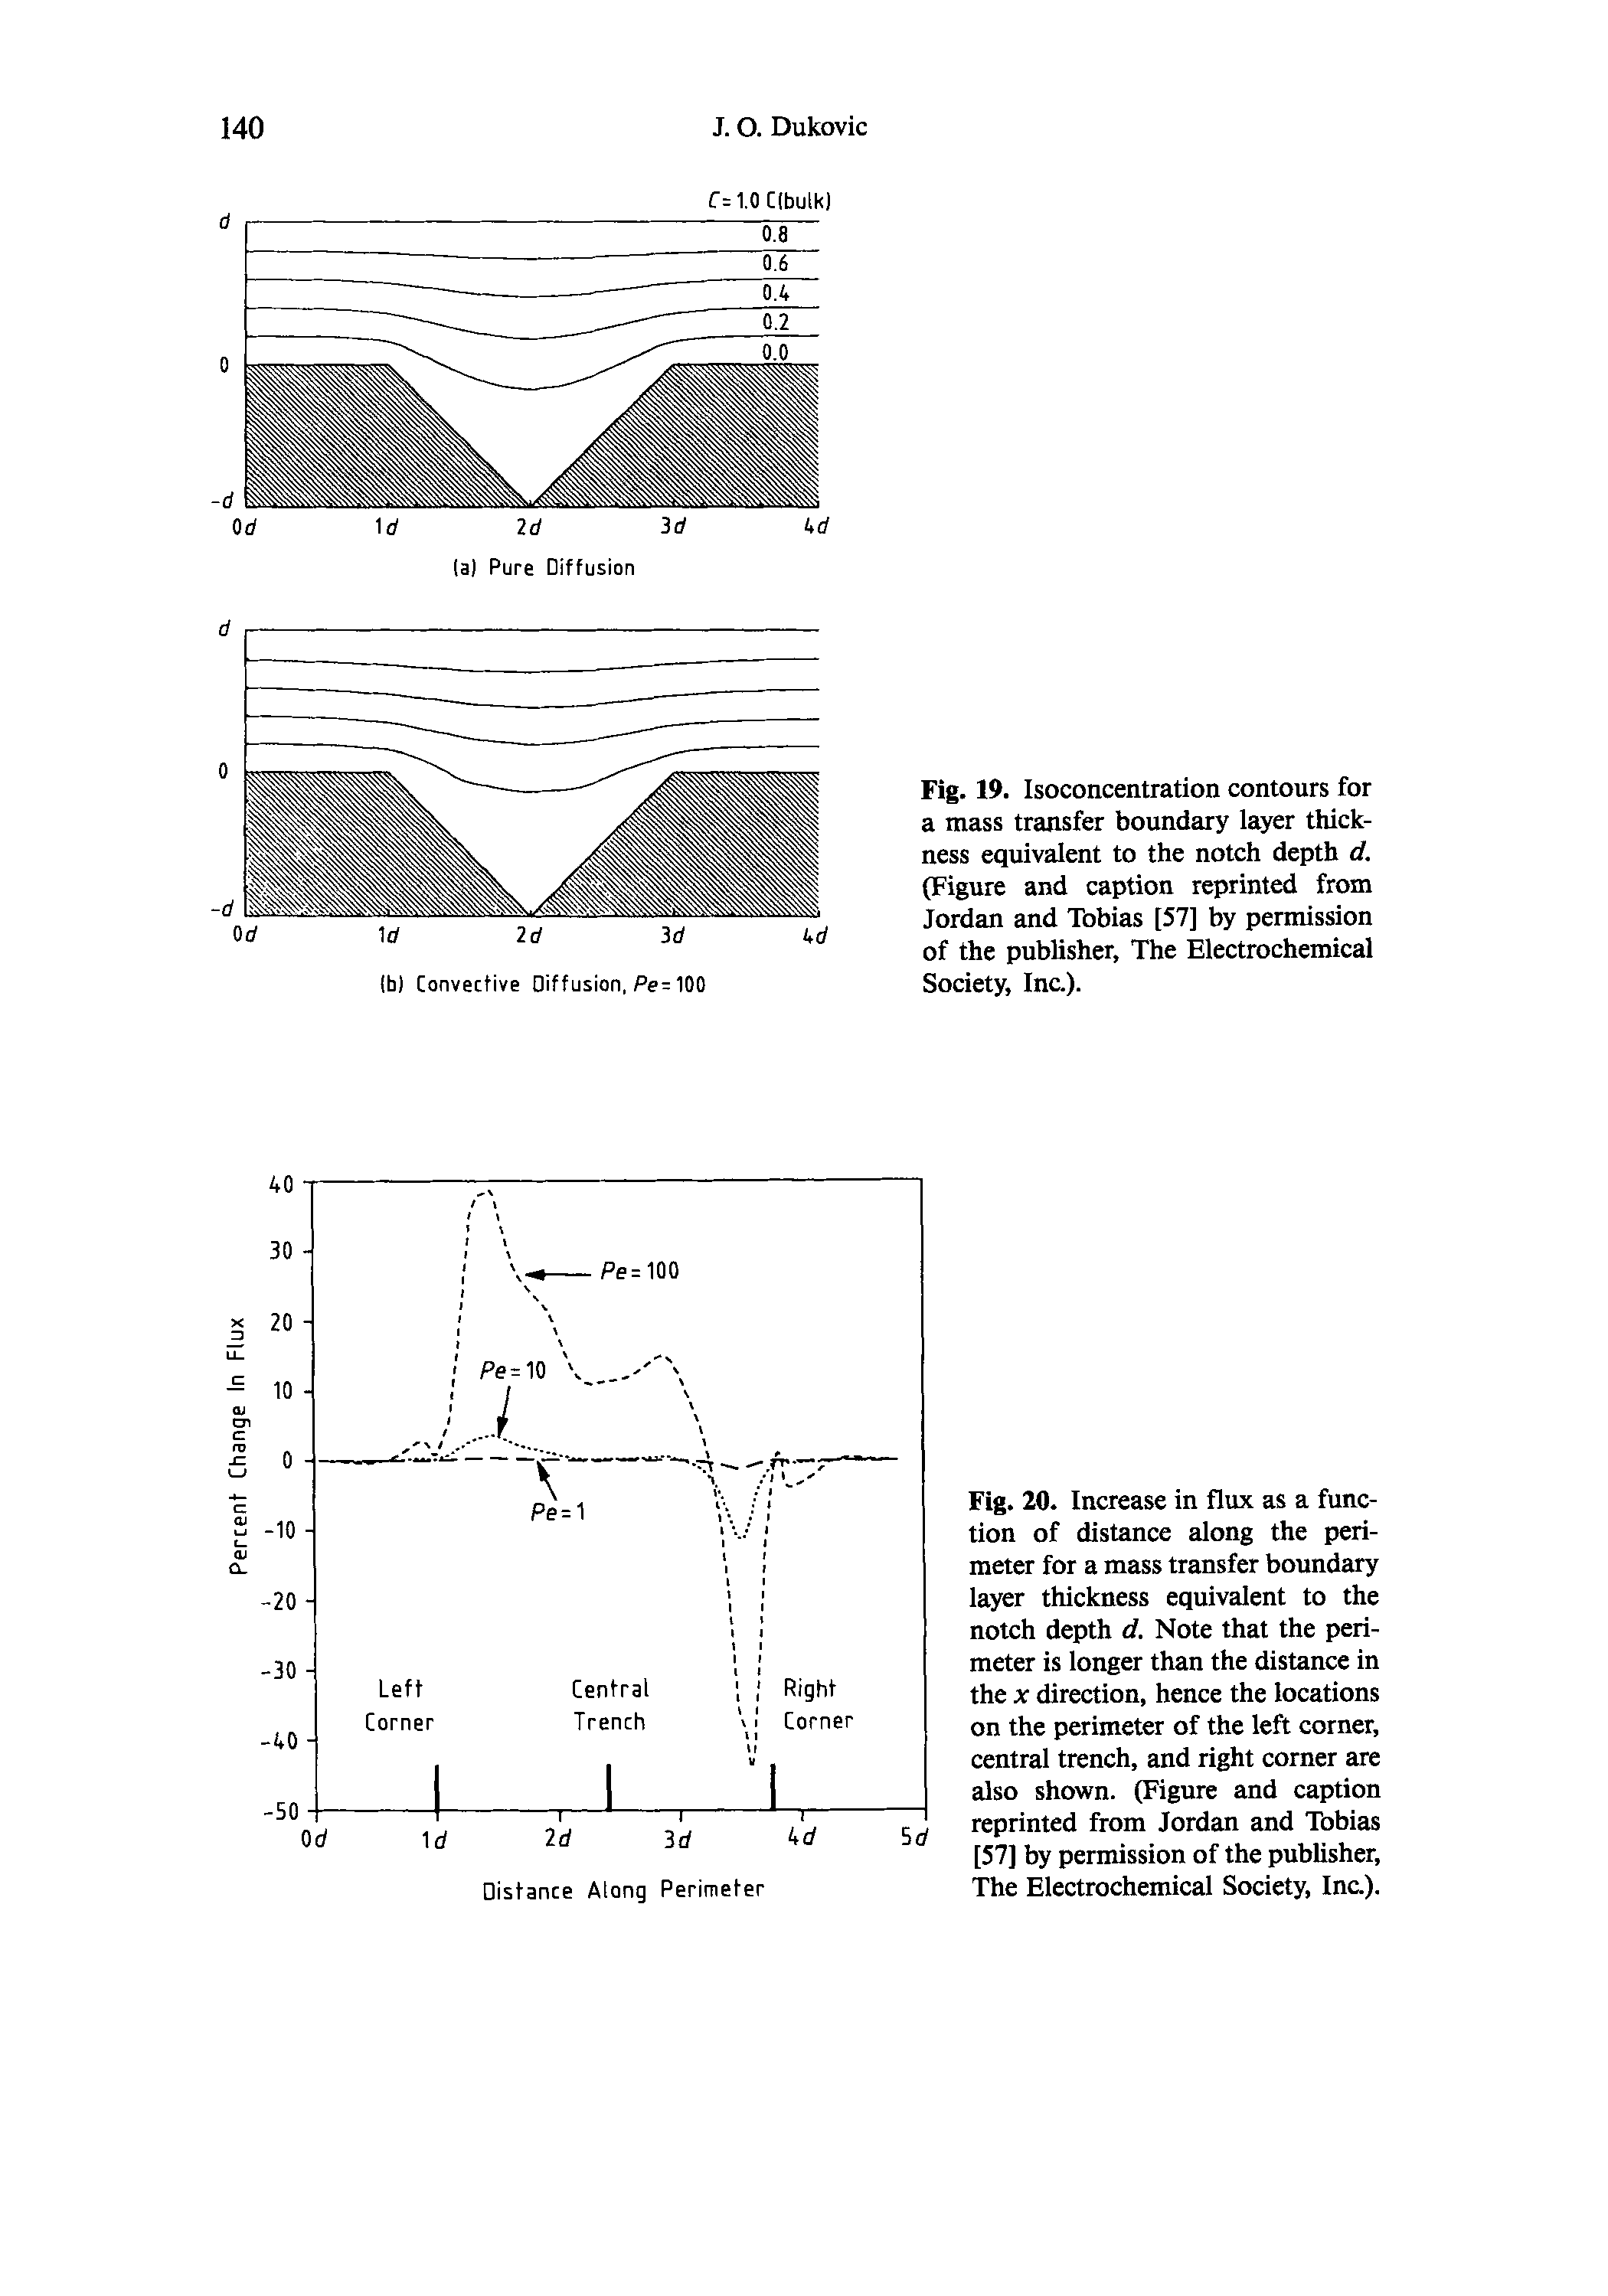 Fig. 19. Isoconcentration contours for a mass transfer boundary layer thickness equivalent to the notch depth d. (Figure and caption reprinted from Jordan and Tobias [57] by permission of the publisher, The Electrochemical Society, Inc.).